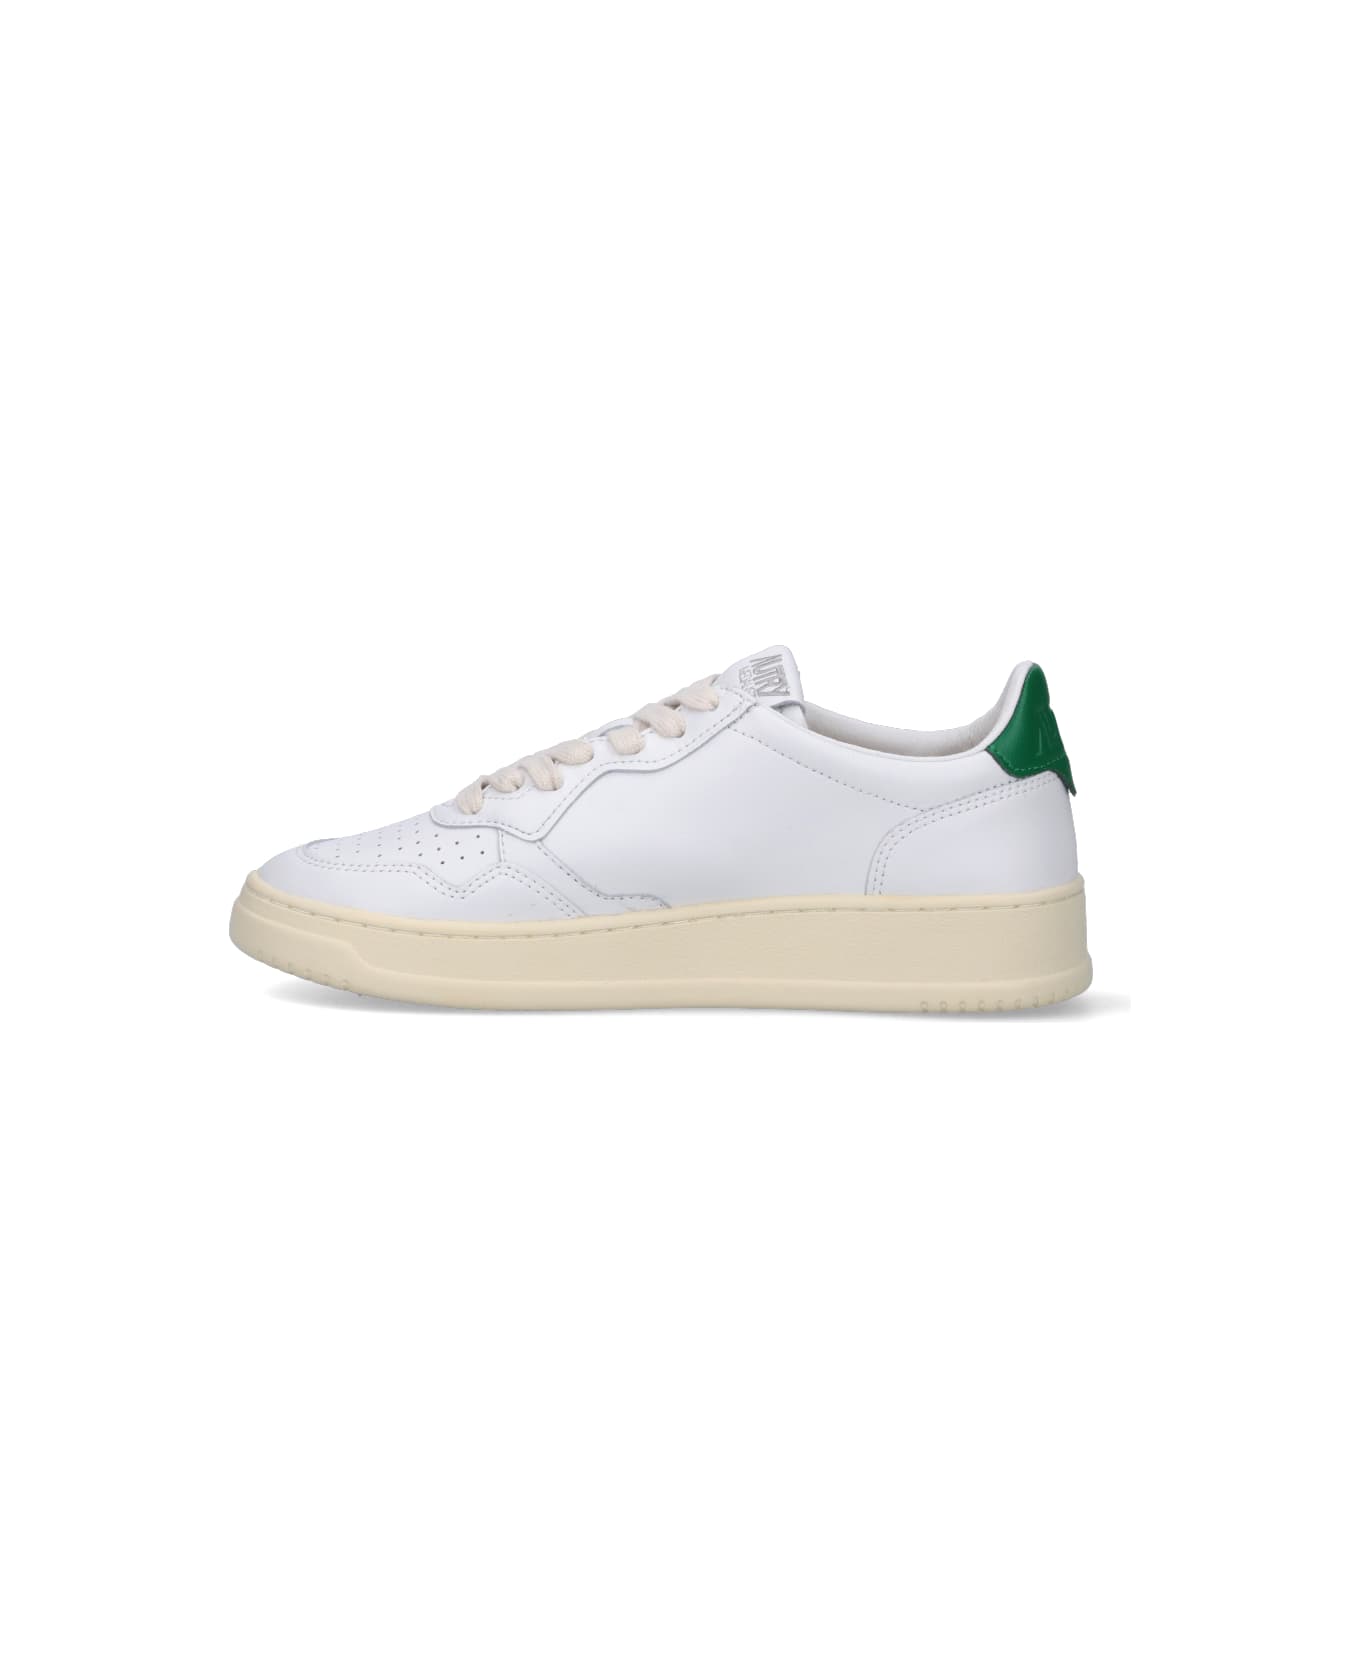 Autry 'medalist' Low Sneakers - Green